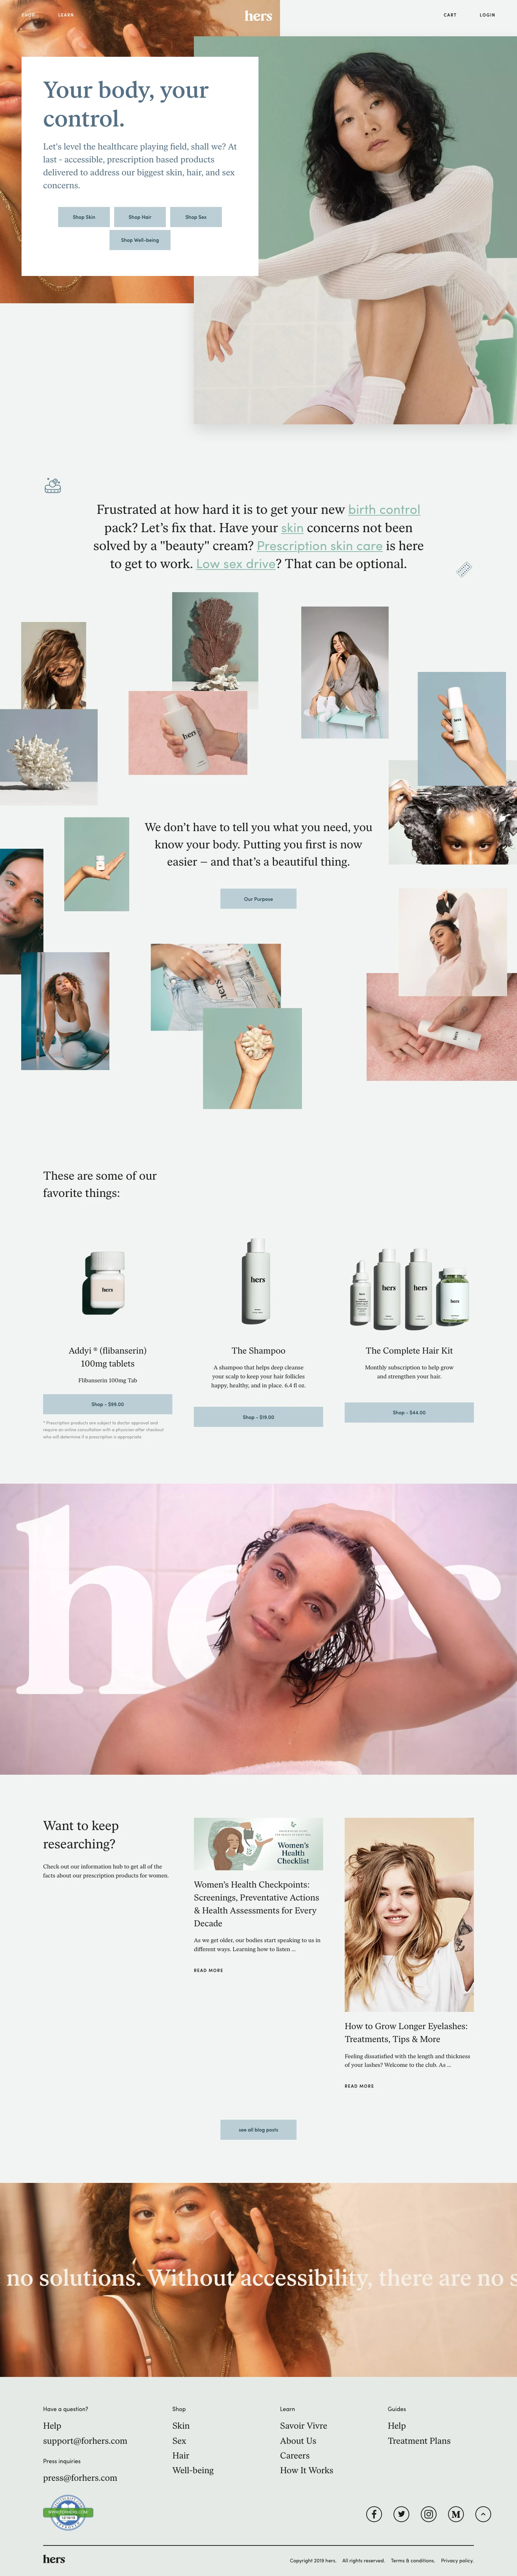 hers Landing Page Example: hers is a one-stop shop for women's health and personal care providing medical grade solutions for skin care, birth control, and sexual health. everything is prescribed online and shipped directly to your door.